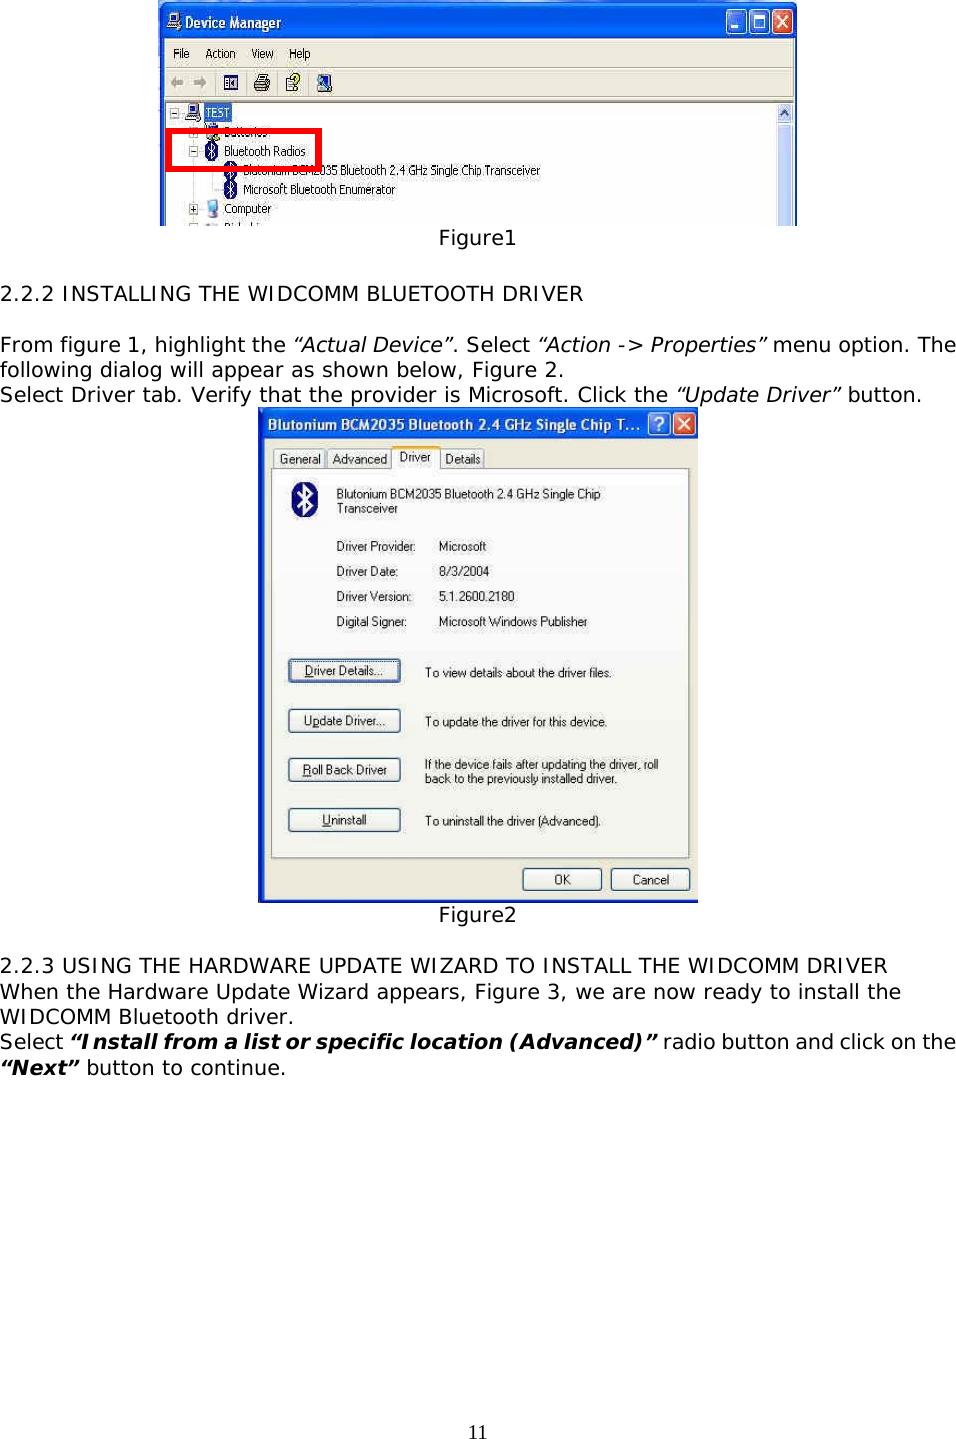 11  Figure1  2.2.2 INSTALLING THE WIDCOMM BLUETOOTH DRIVER  From figure 1, highlight the “Actual Device”. Select “Action -&gt; Properties” menu option. The following dialog will appear as shown below, Figure 2. Select Driver tab. Verify that the provider is Microsoft. Click the “Update Driver” button.  Figure2  2.2.3 USING THE HARDWARE UPDATE WIZARD TO INSTALL THE WIDCOMM DRIVER When the Hardware Update Wizard appears, Figure 3, we are now ready to install the WIDCOMM Bluetooth driver. Select “Install from a list or specific location (Advanced)” radio button and click on the “Next” button to continue. 